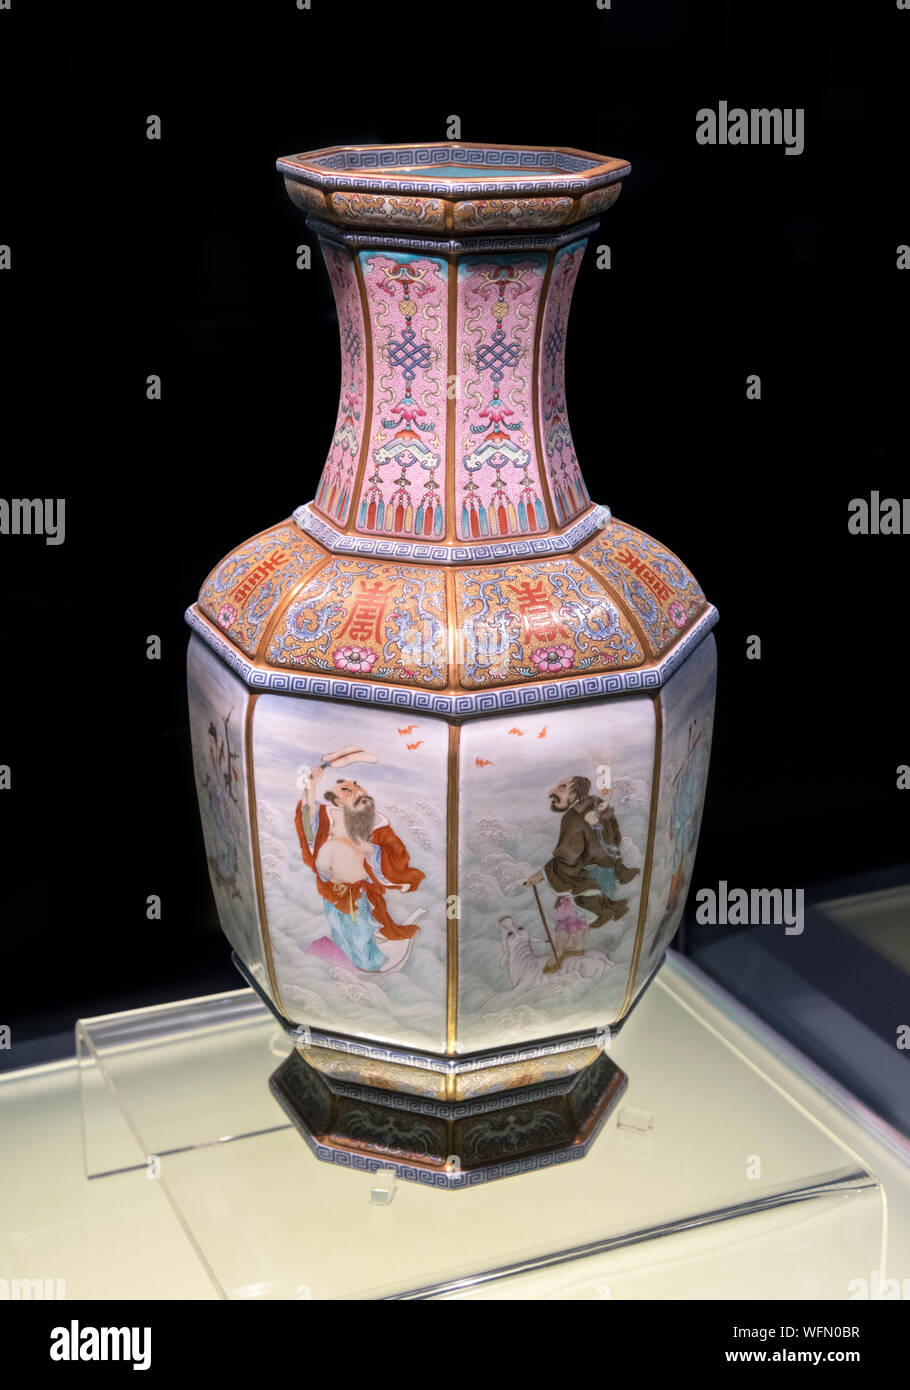 Qing vase. Jingdezhen ware. Vase with Fencai design of eight immortals, Quianlong reign of the Qing Dynasty (1736-1795 AD) Stock Photo